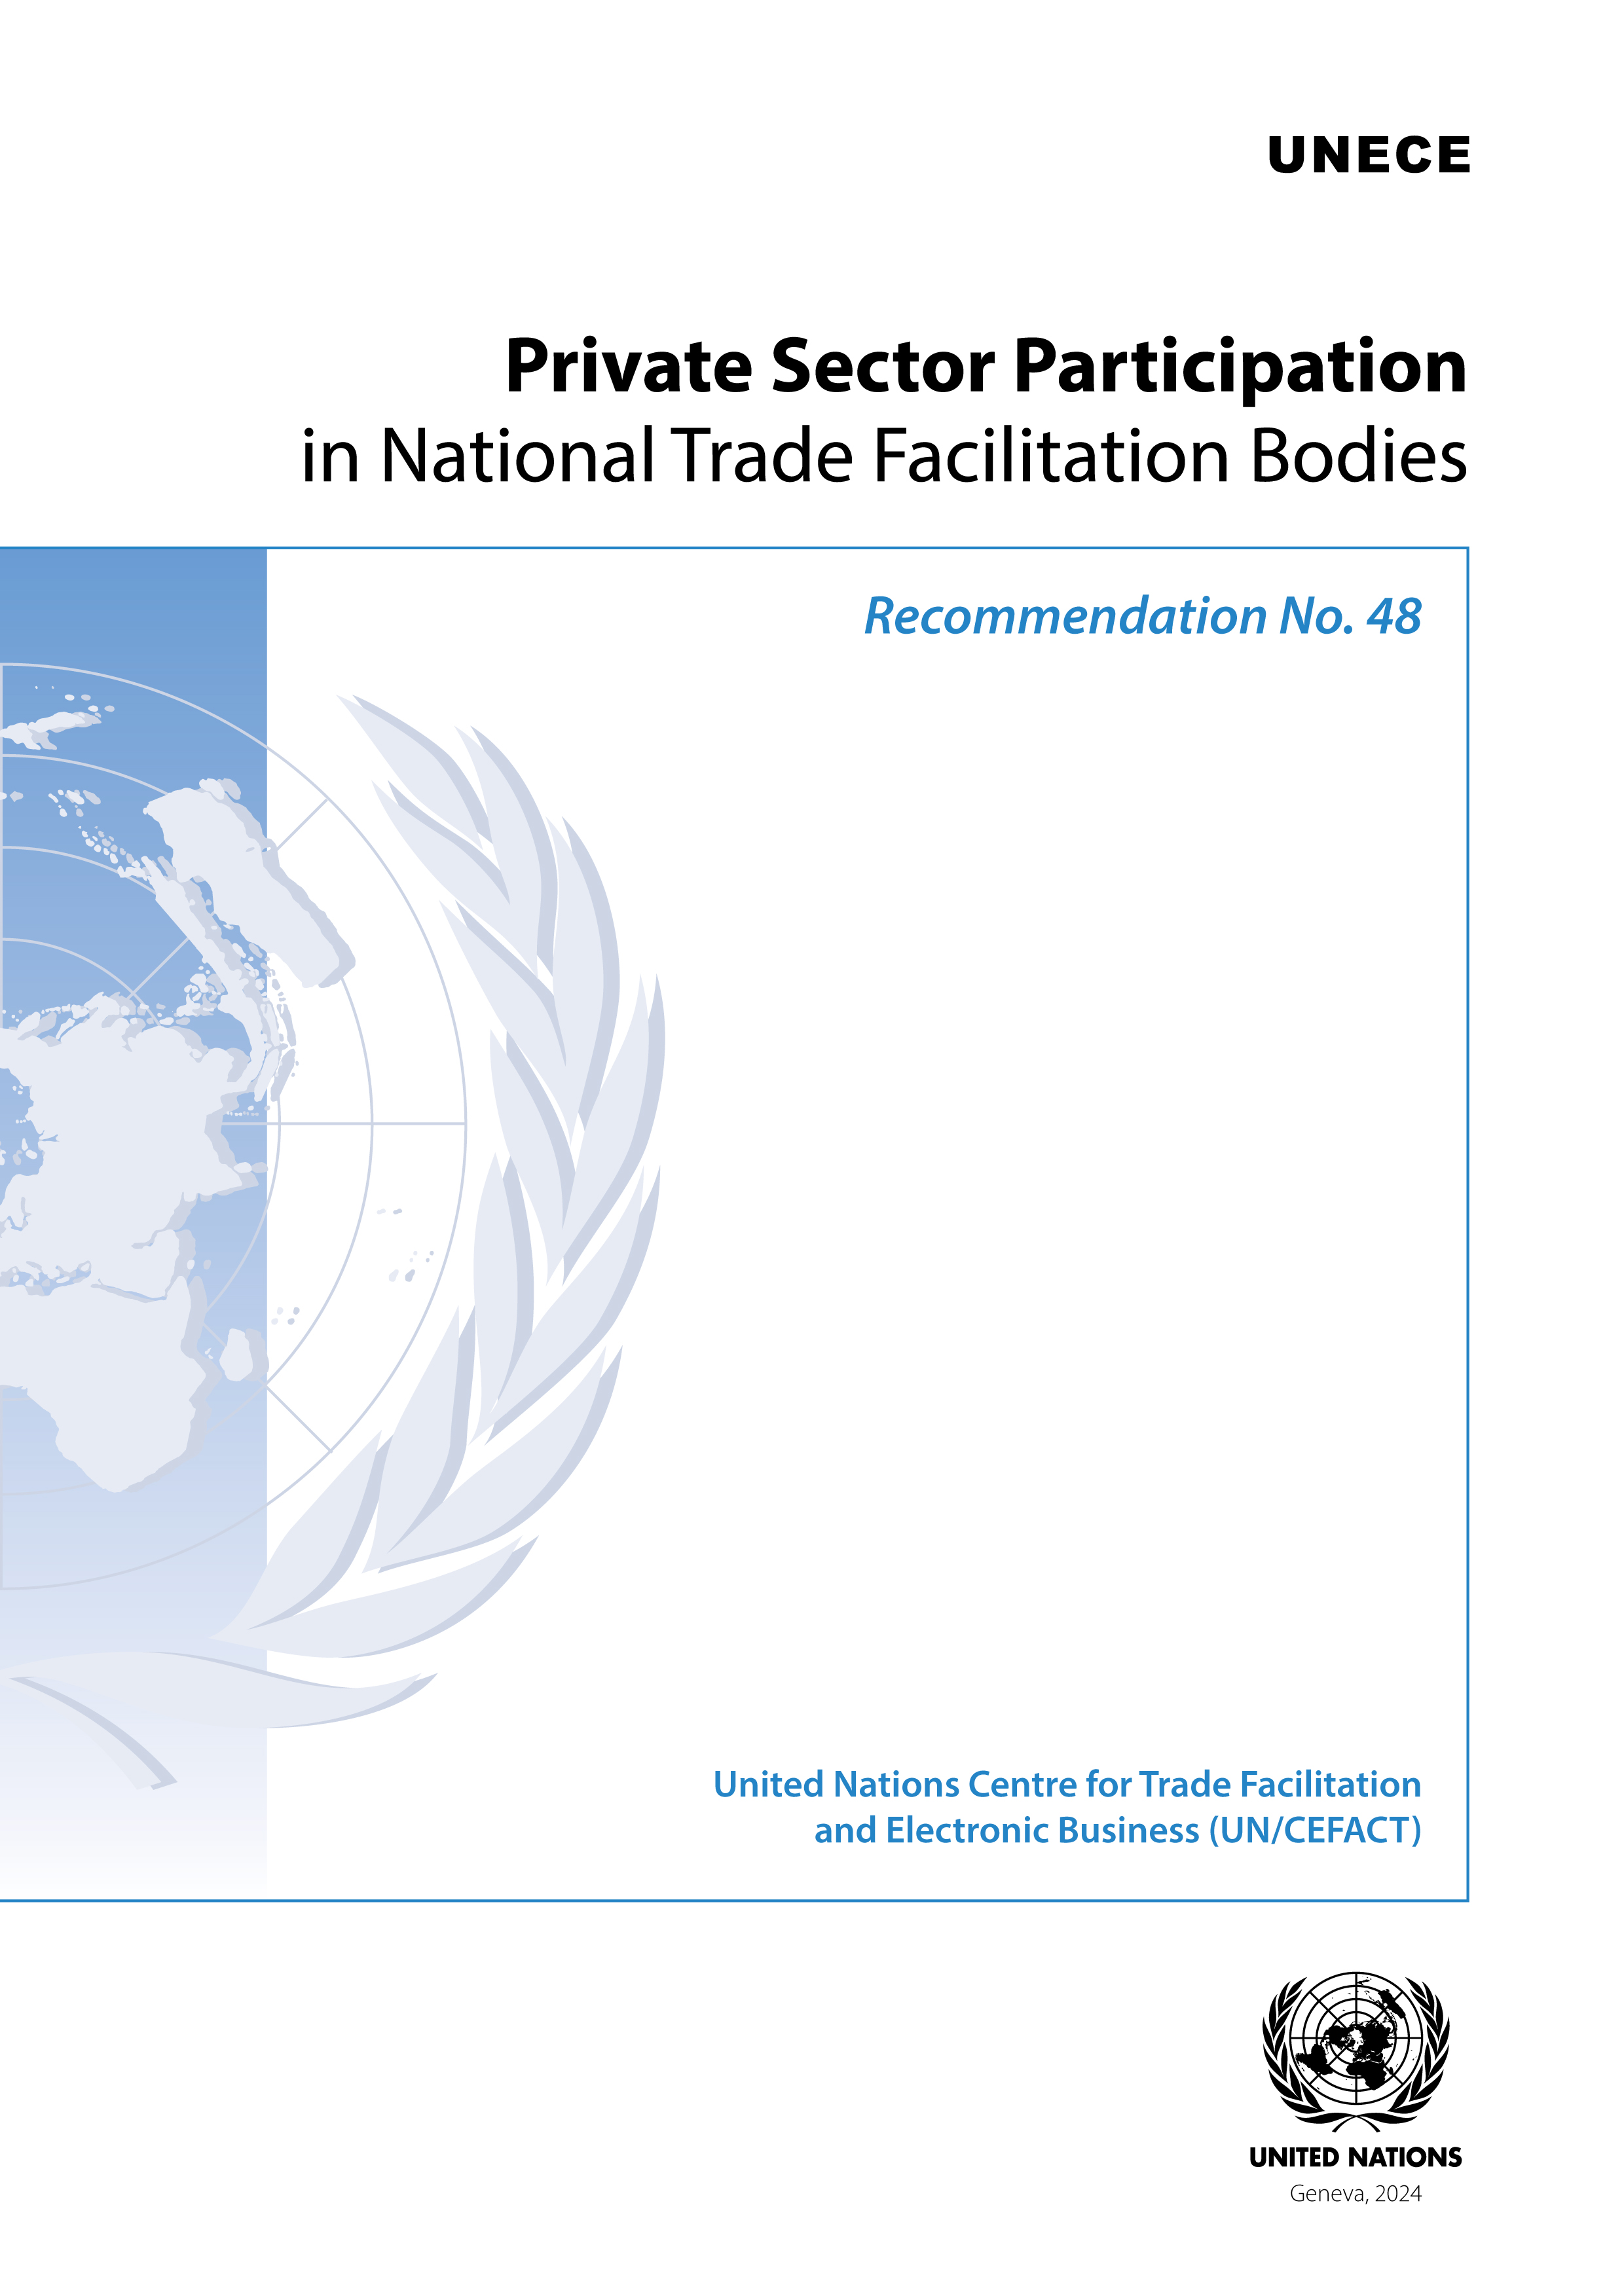 image of Recommendation No. 48: Private Sector Participation in National Trade Facilitation Bodies